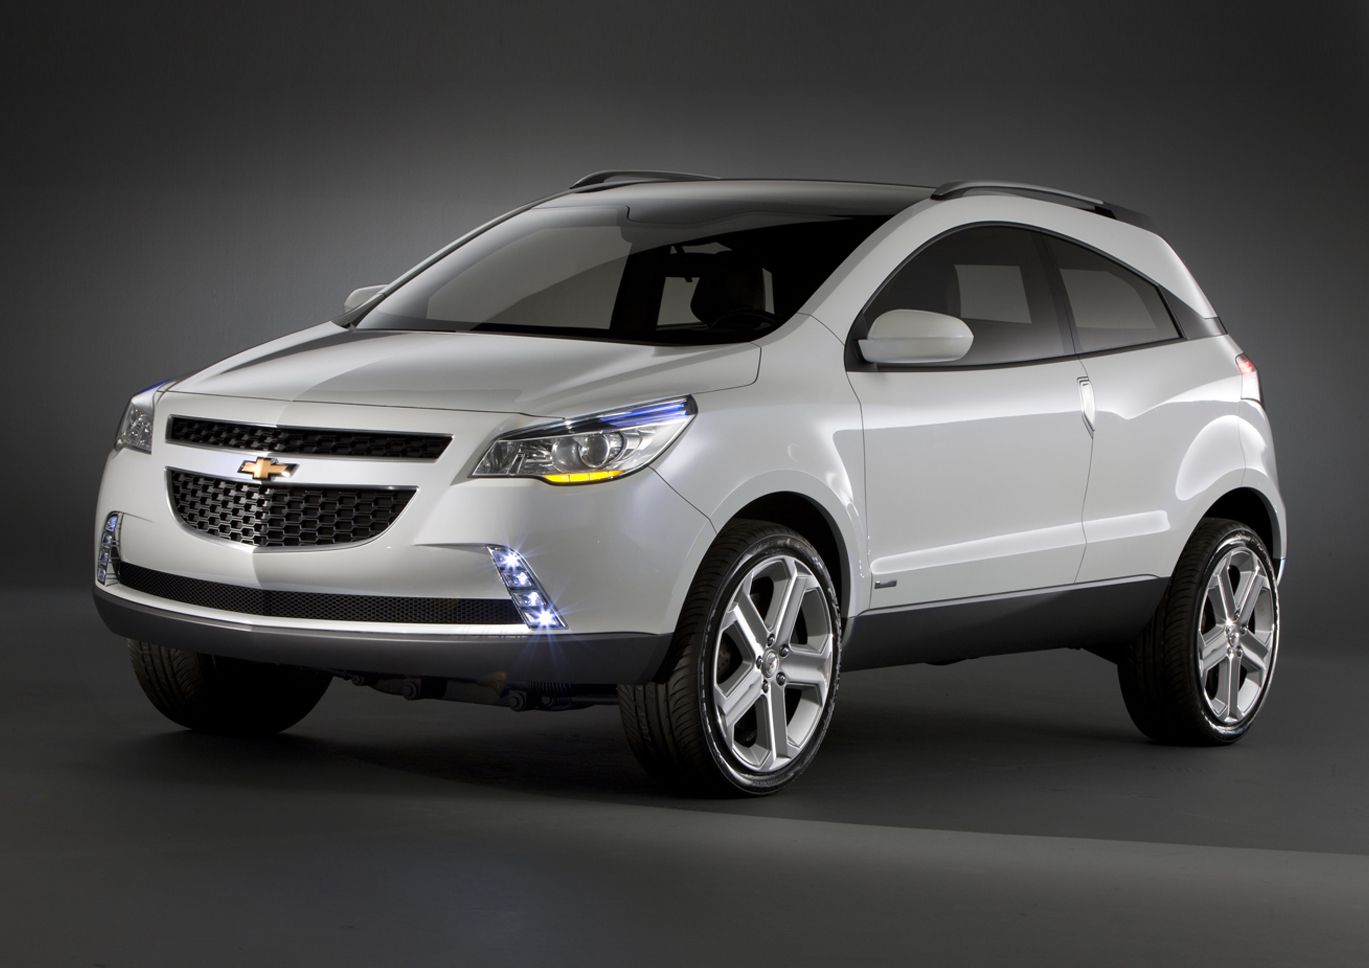 2008 Chevrolet GPiX Crossover Coupe Concept